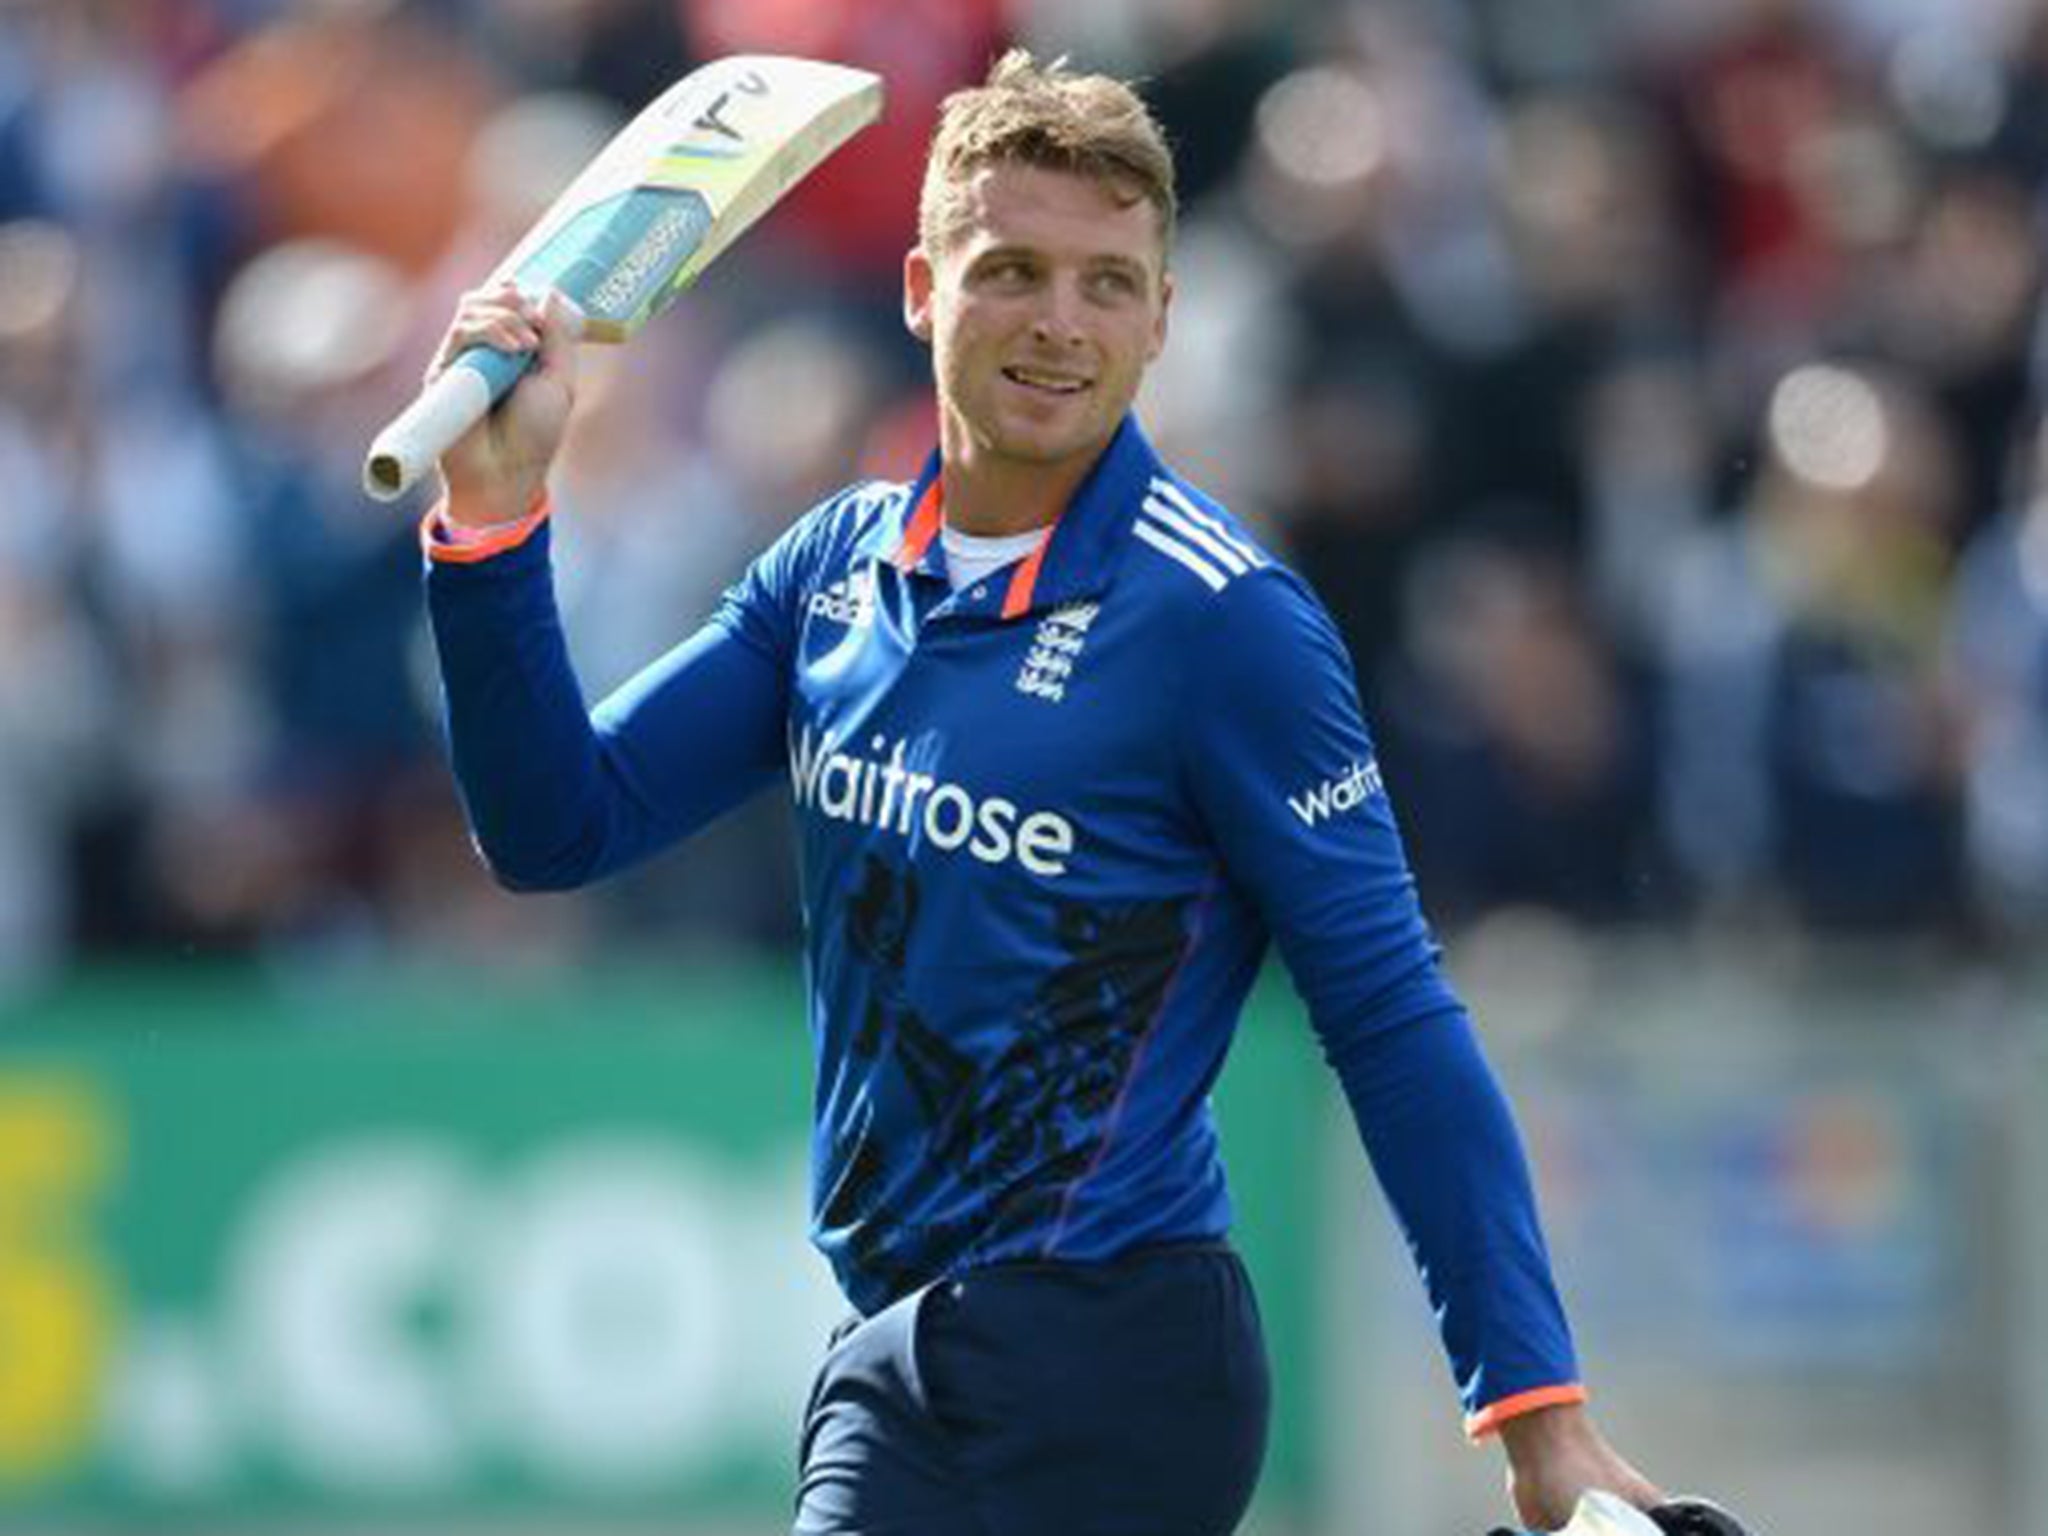 England’s Jos Buttler, who is set for his first Ashes Test in Cardiff, expects to face some sledging from the tourists